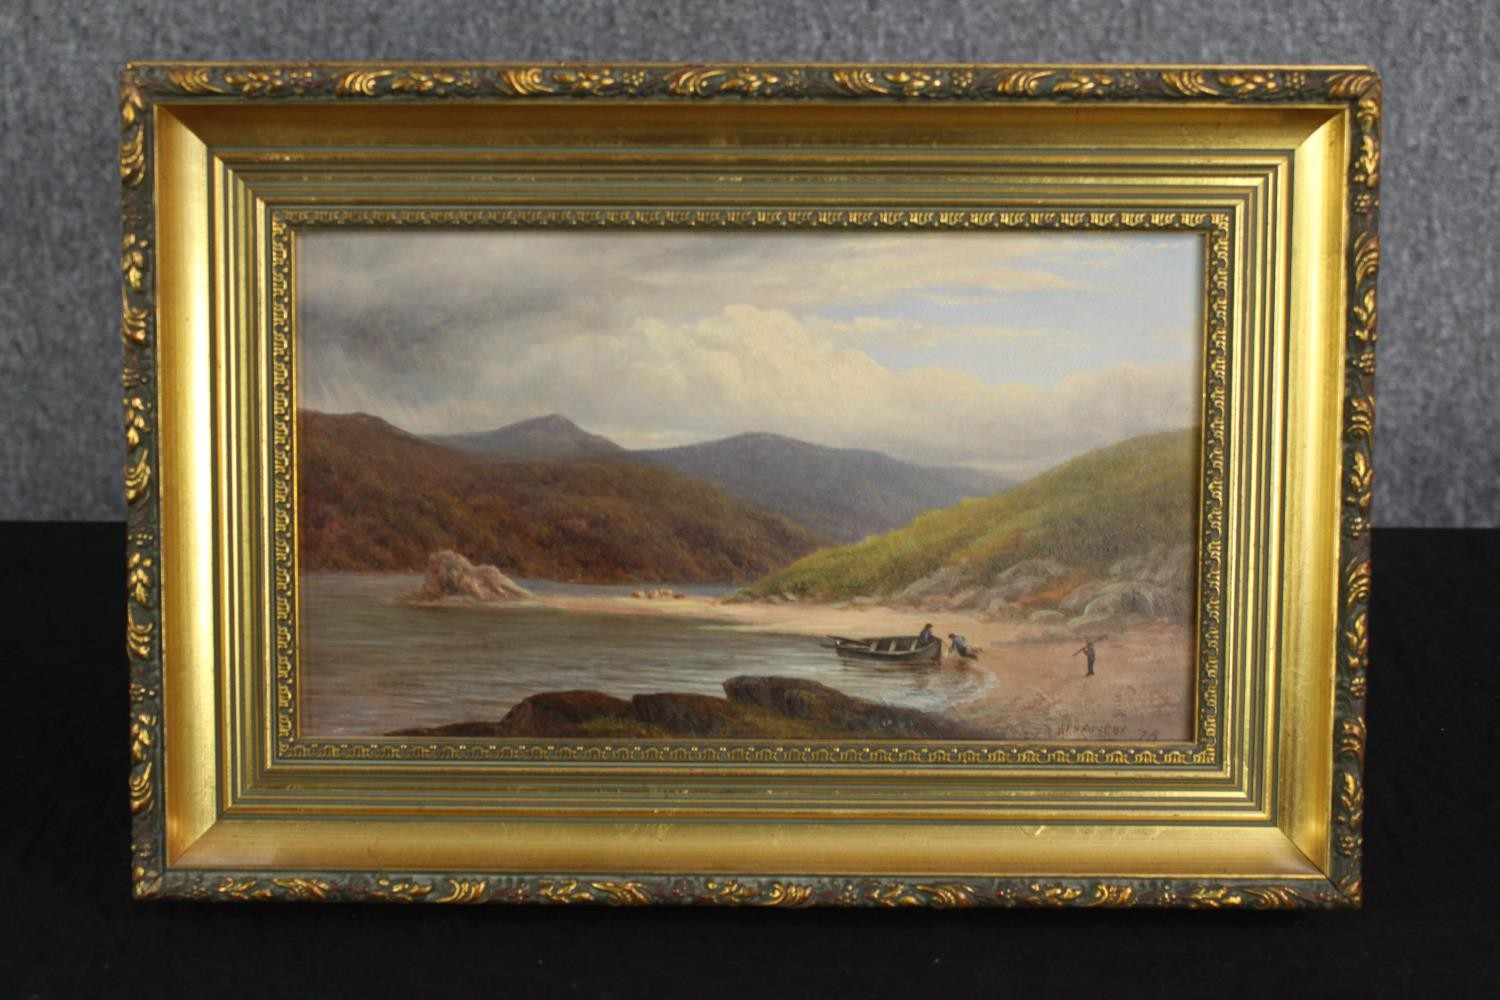 W. P. H. Foster (19th Century artist). Landscape painting dated 1879. In a gilt decorated frame. H. - Image 2 of 4